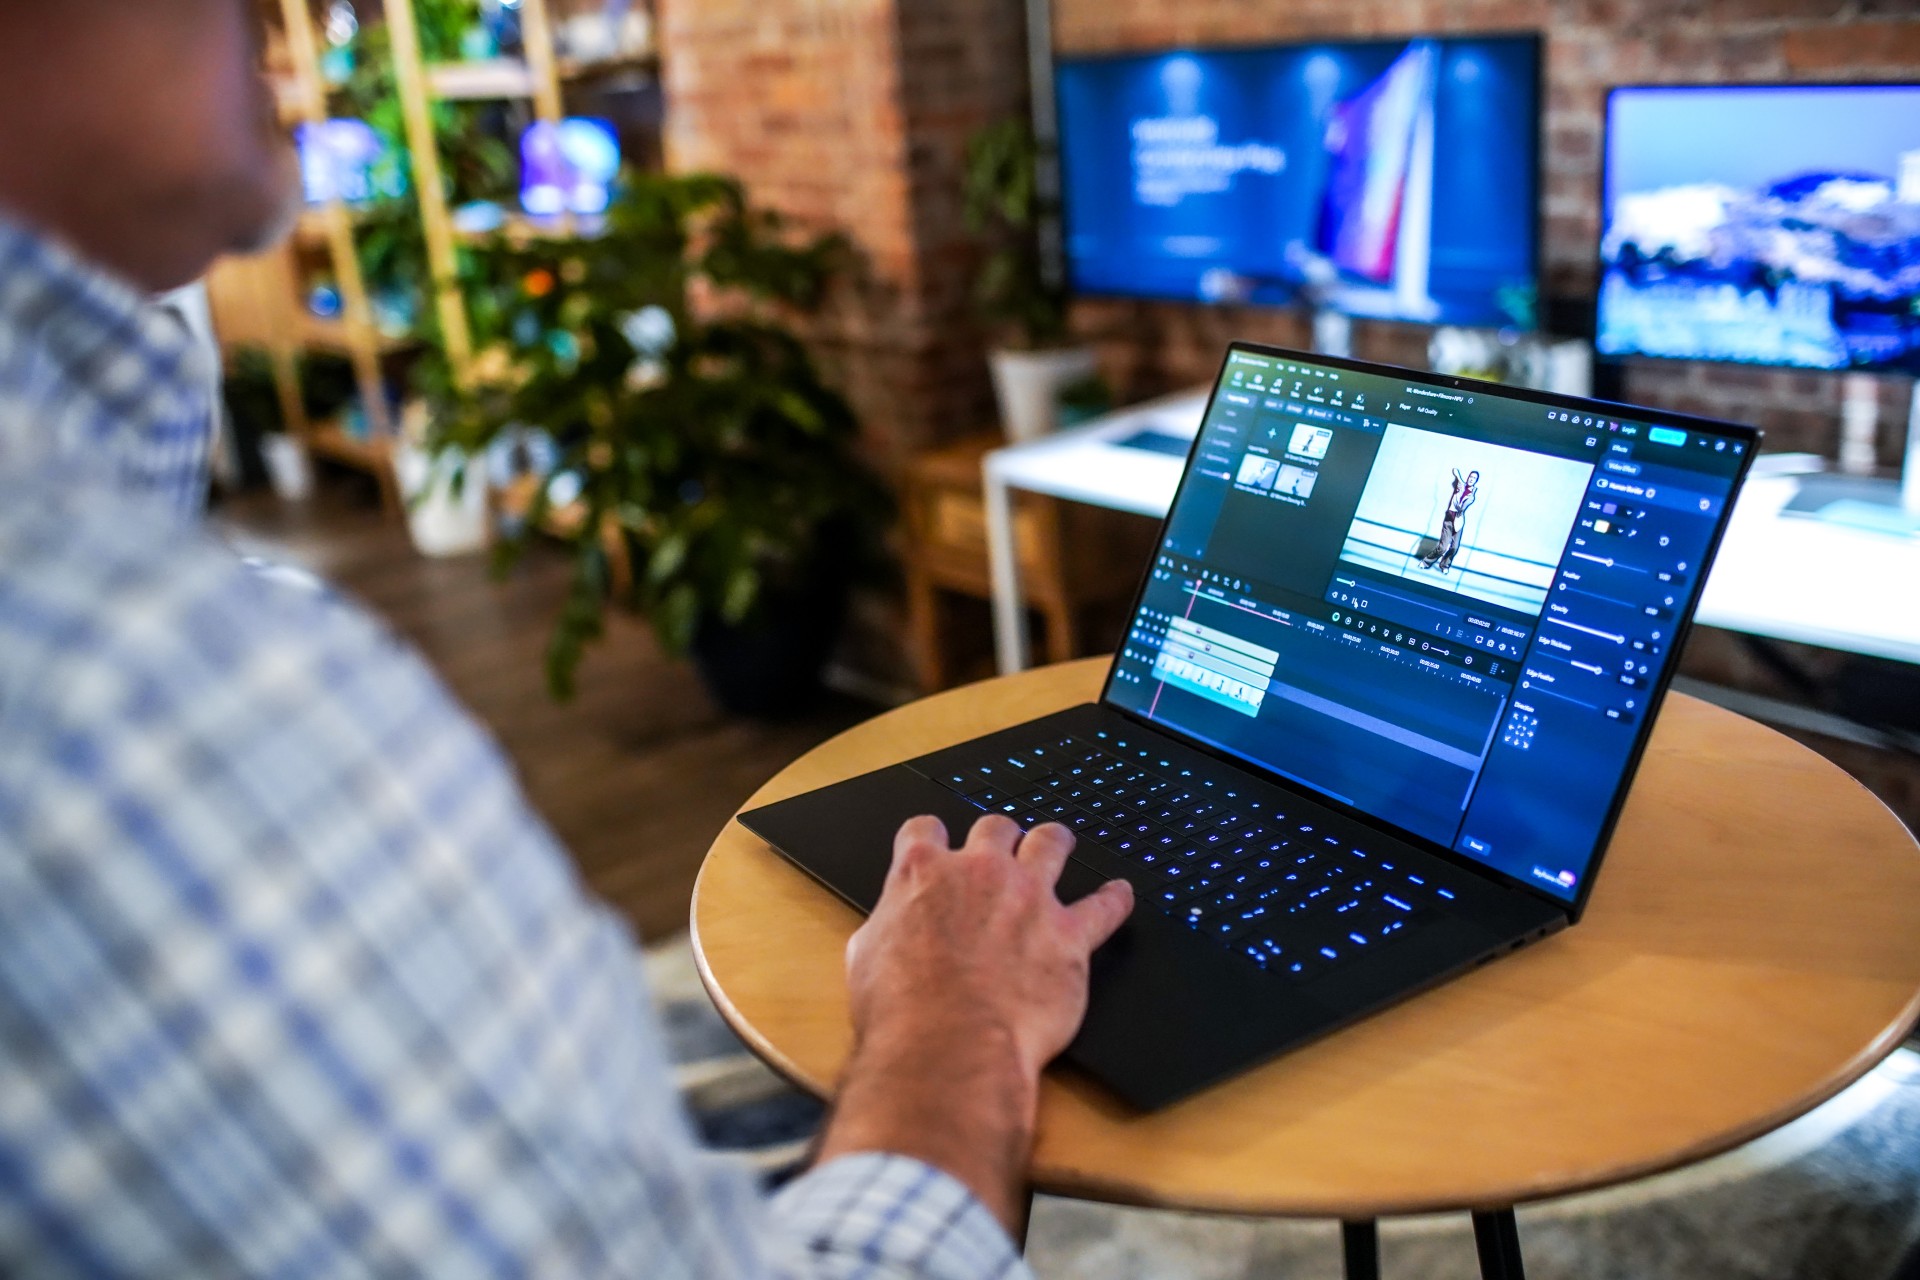 This Dell XPS laptop might be a dark horse for gaming on the go